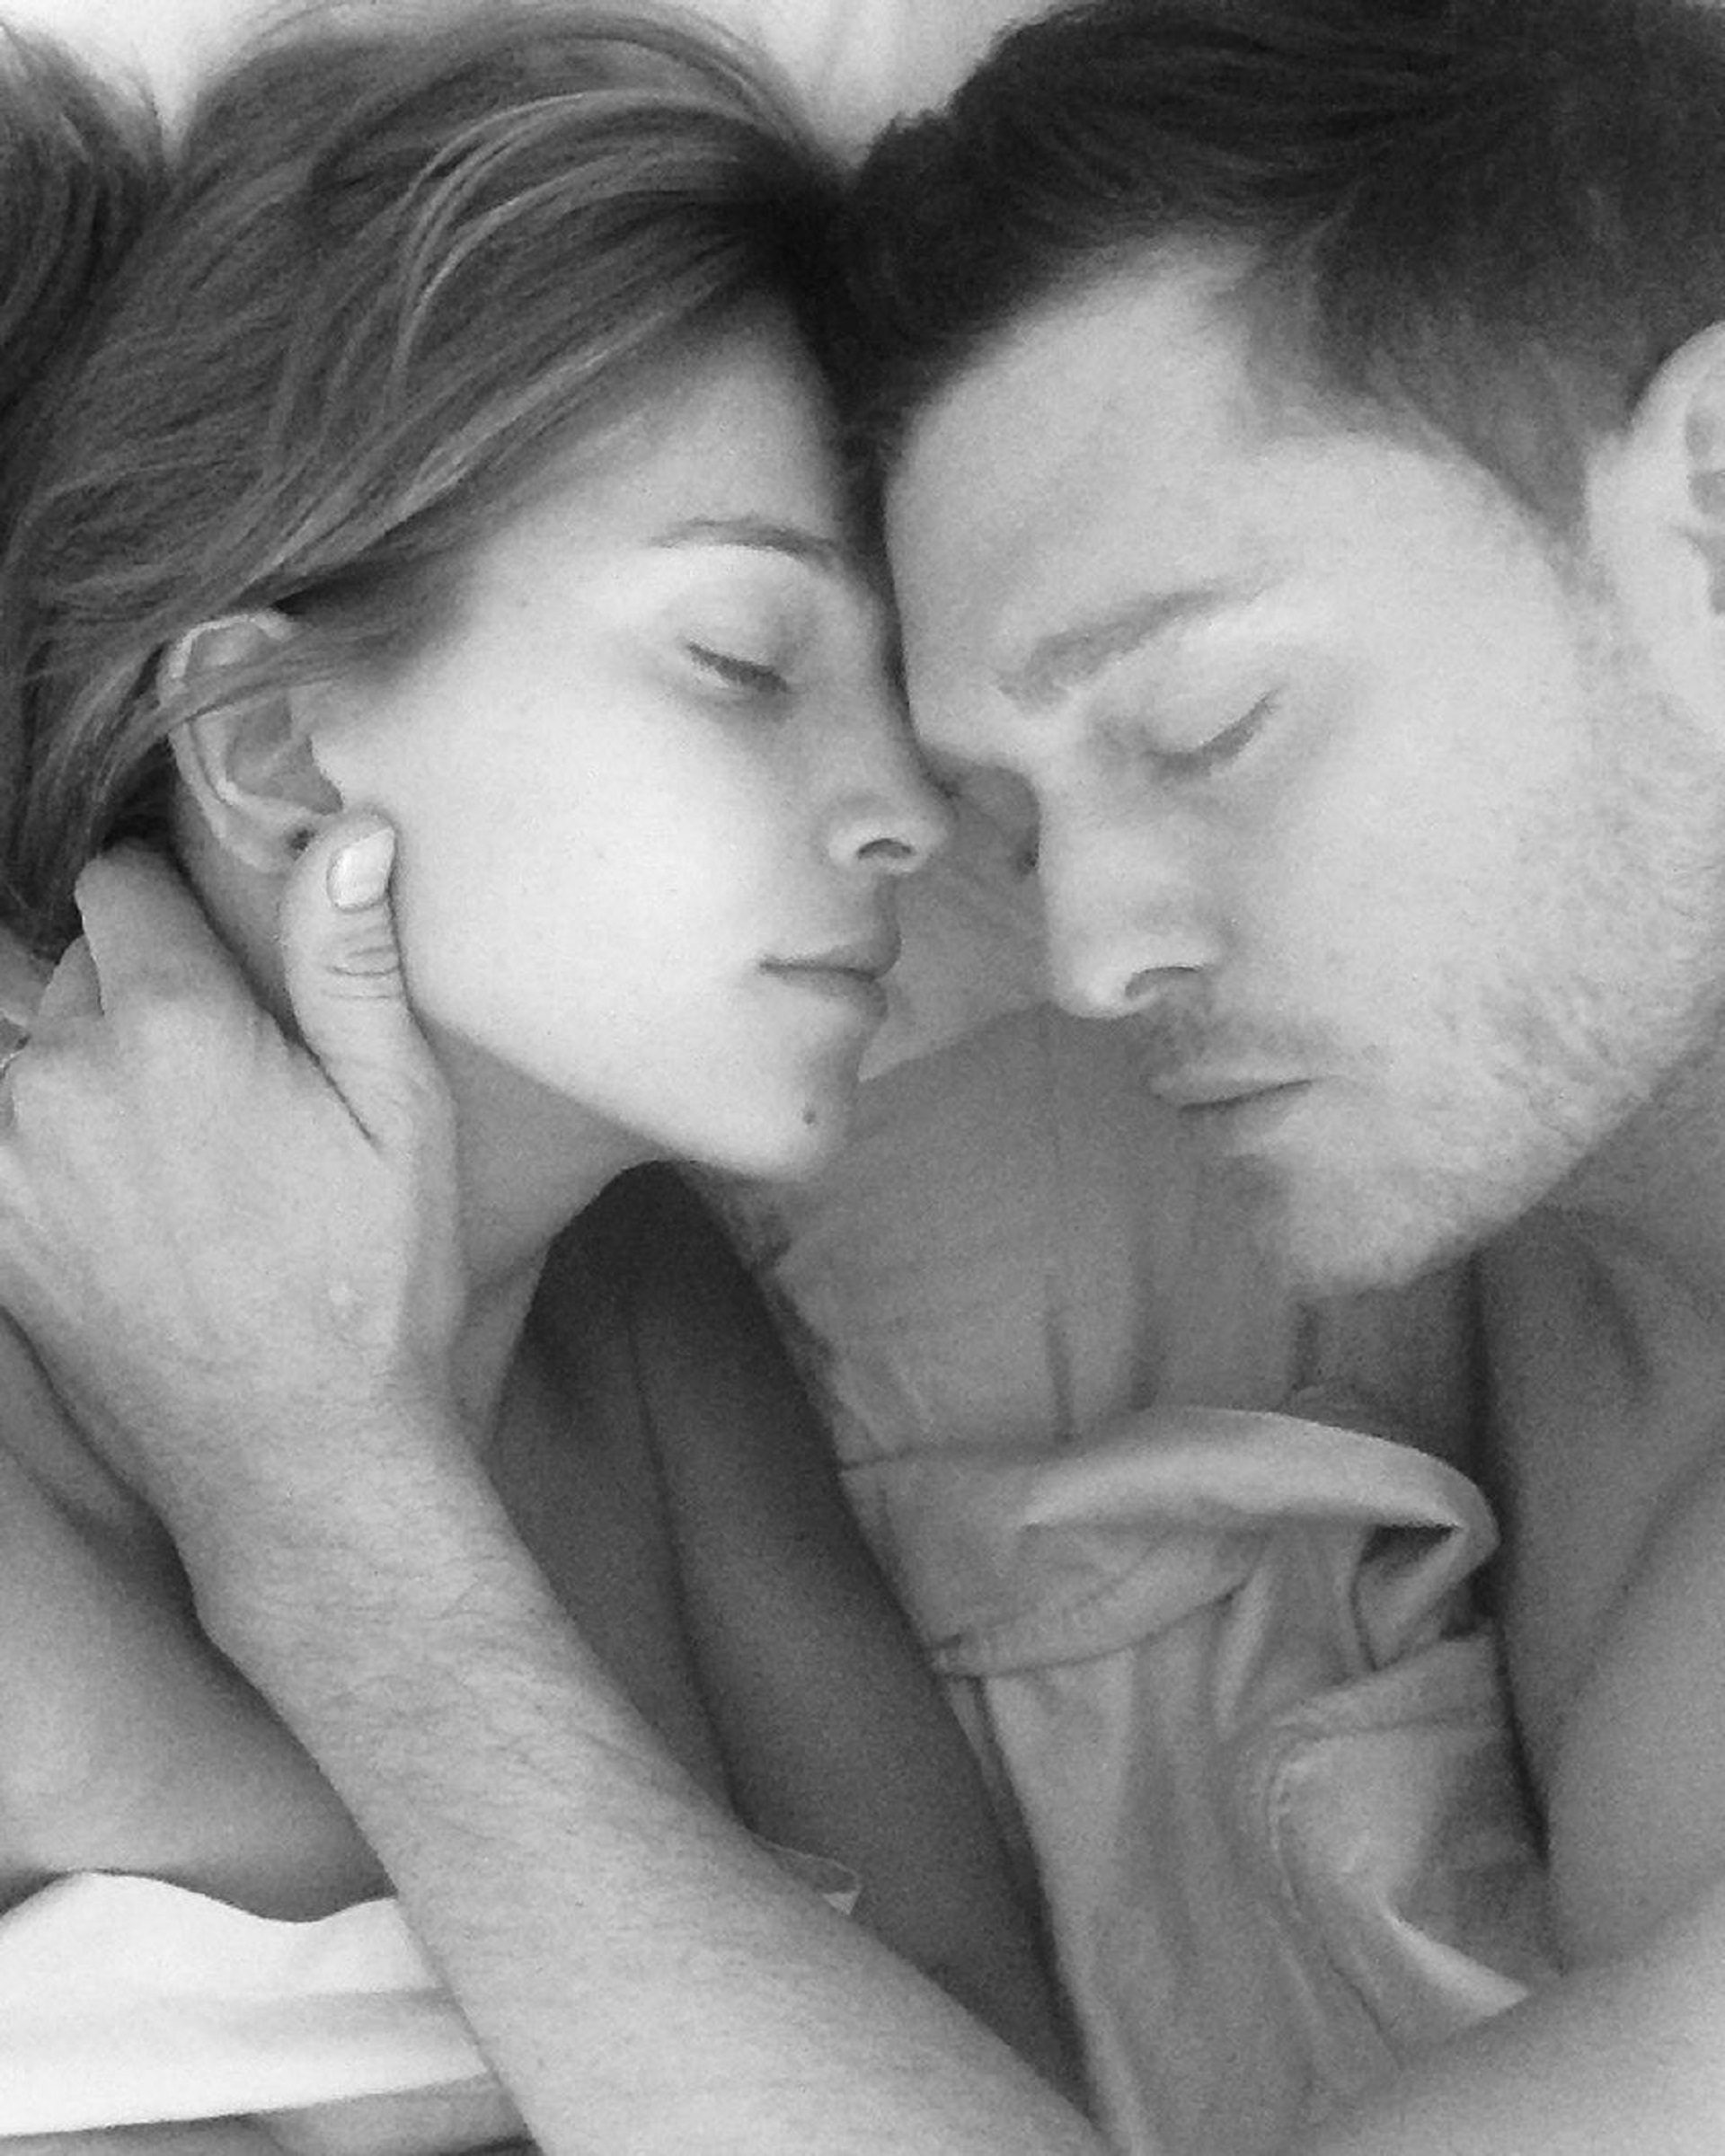 Luisana Lopilato and Michael Bublé share romantic photos on their social networks